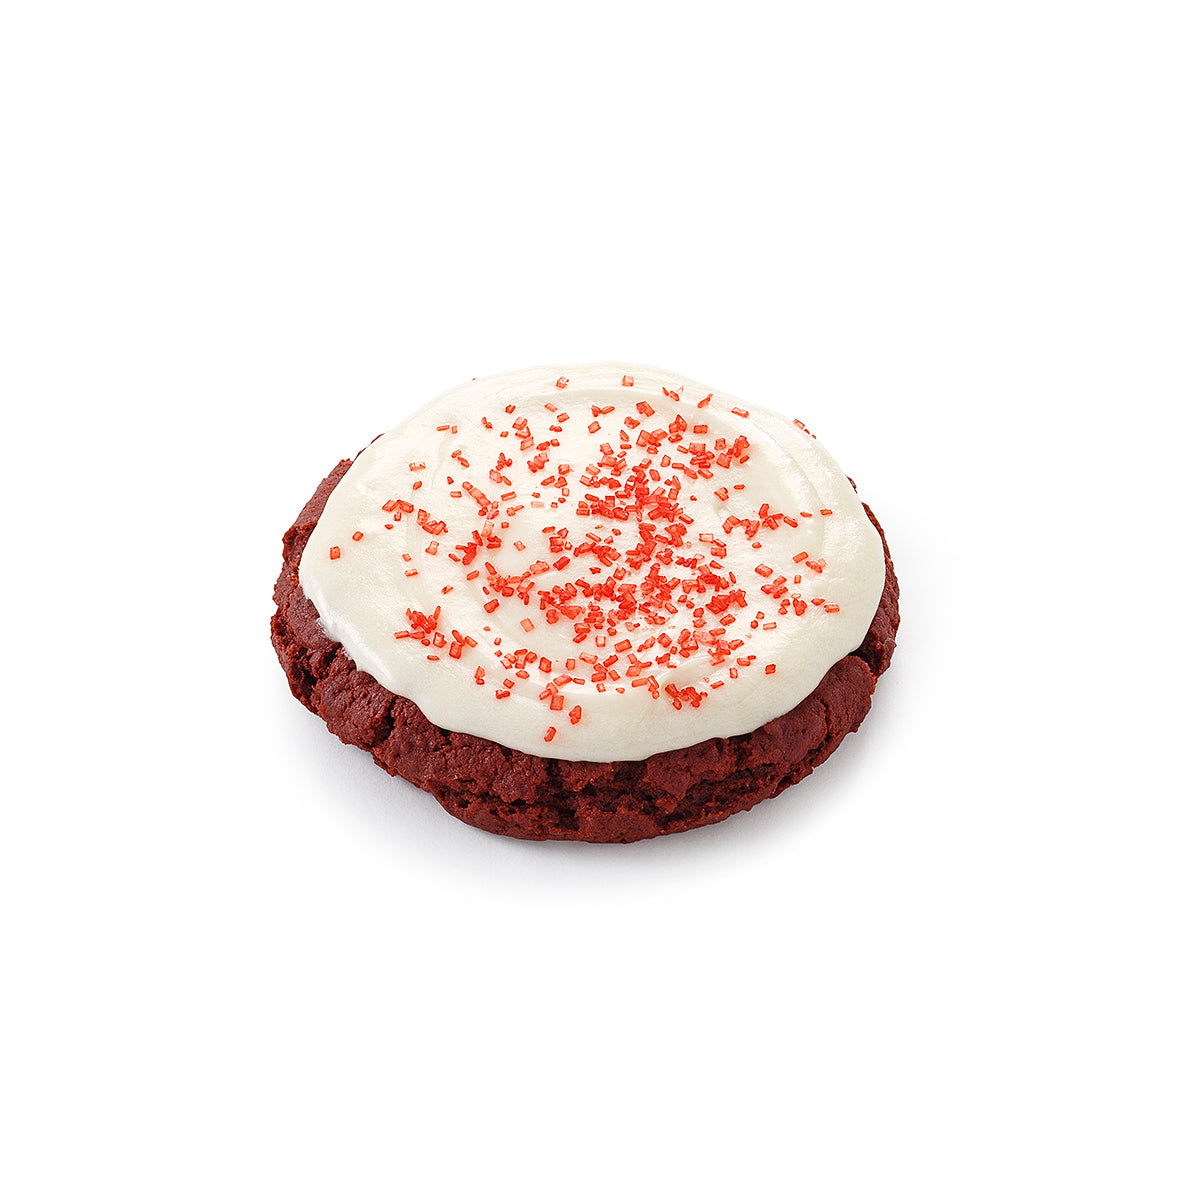 Red Velvet Frosted Cookie